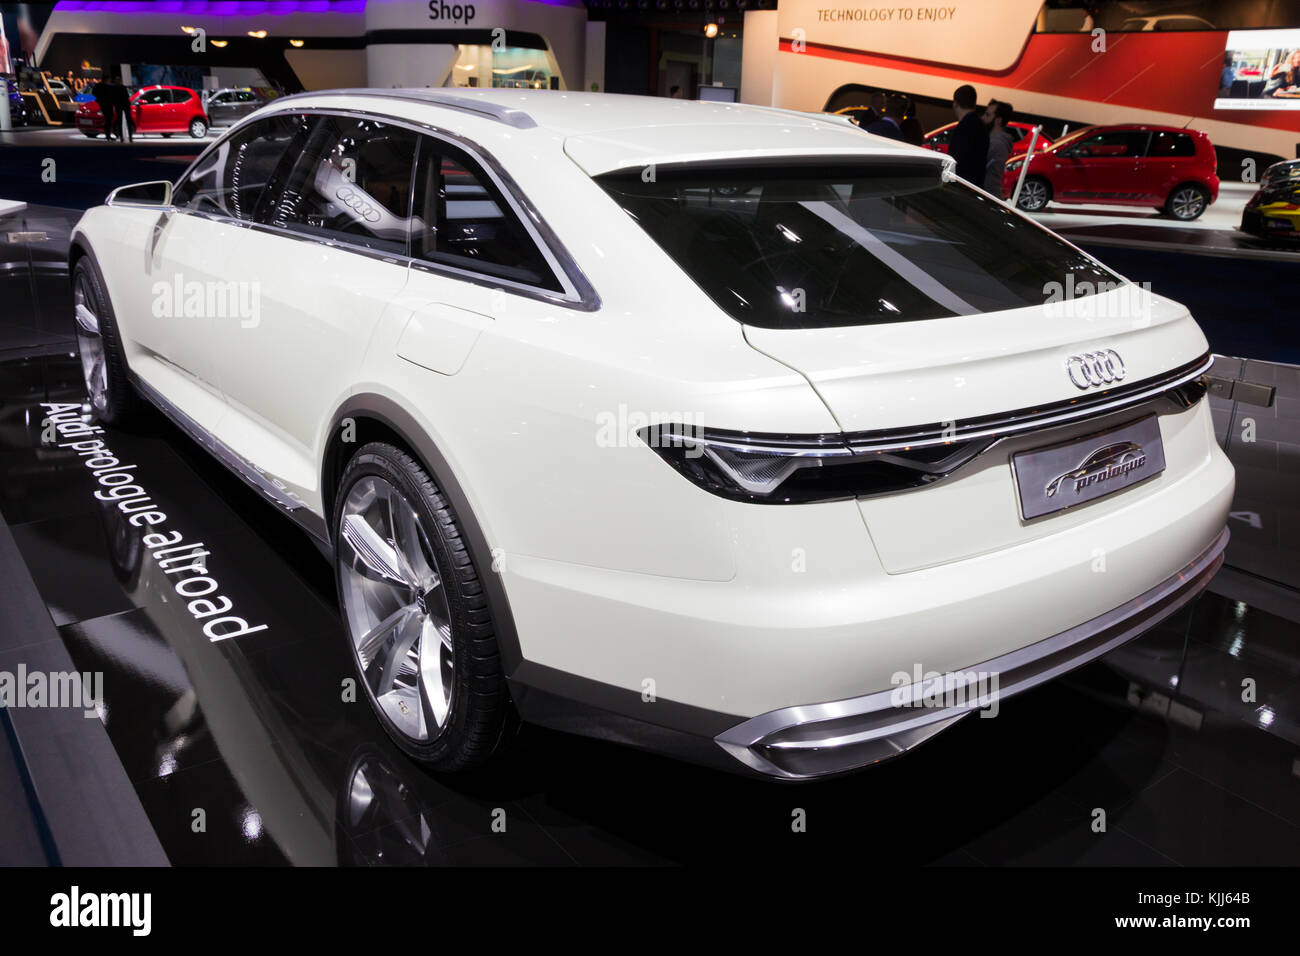 BRUSSELS - JAN 12, 2016: Audi Prologue Allroad car showcased at the Brussels Motor Show. Stock Photo